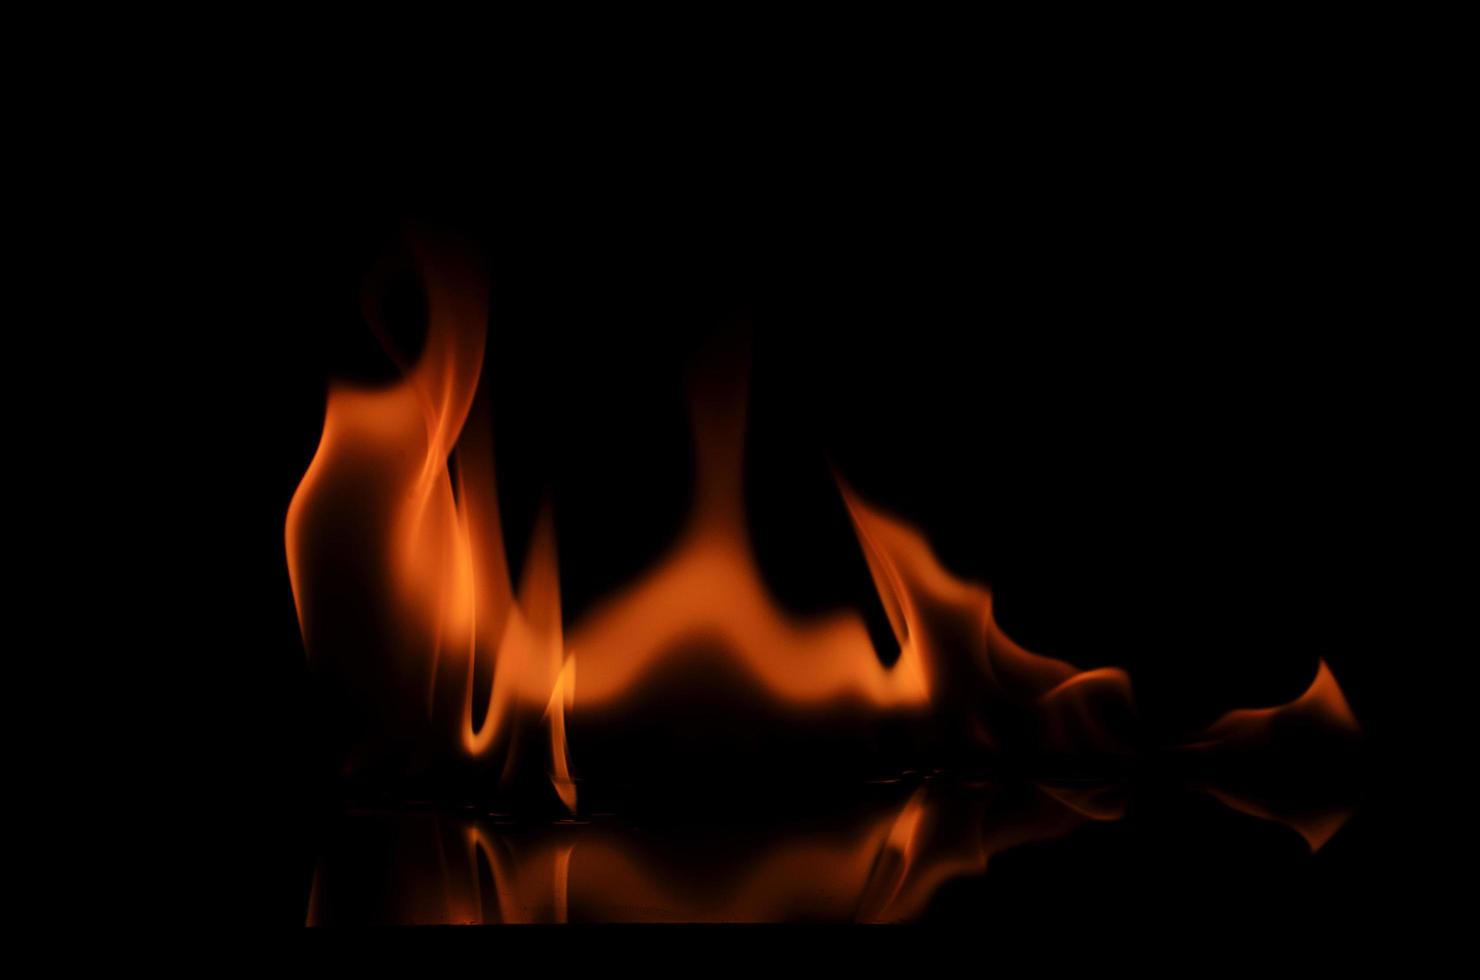 Abstracts backgrounds with fire texture on black backgrounds photo